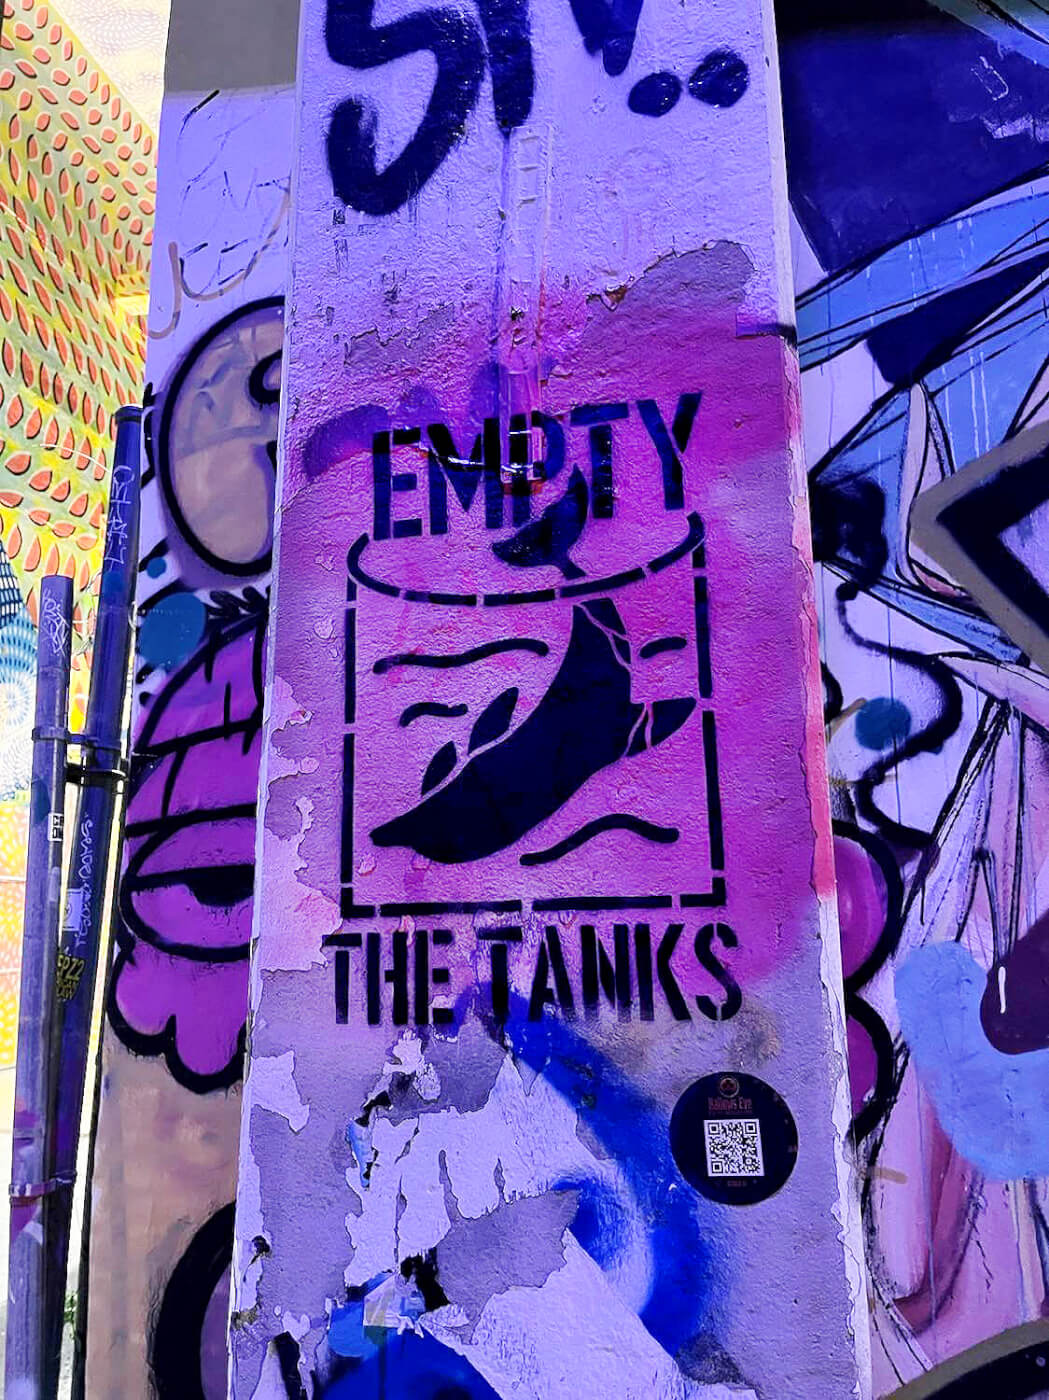 stenciled spray paint art on a concrete pole reading "empty the tanks" with an illustration of a dolphin in a small tank.